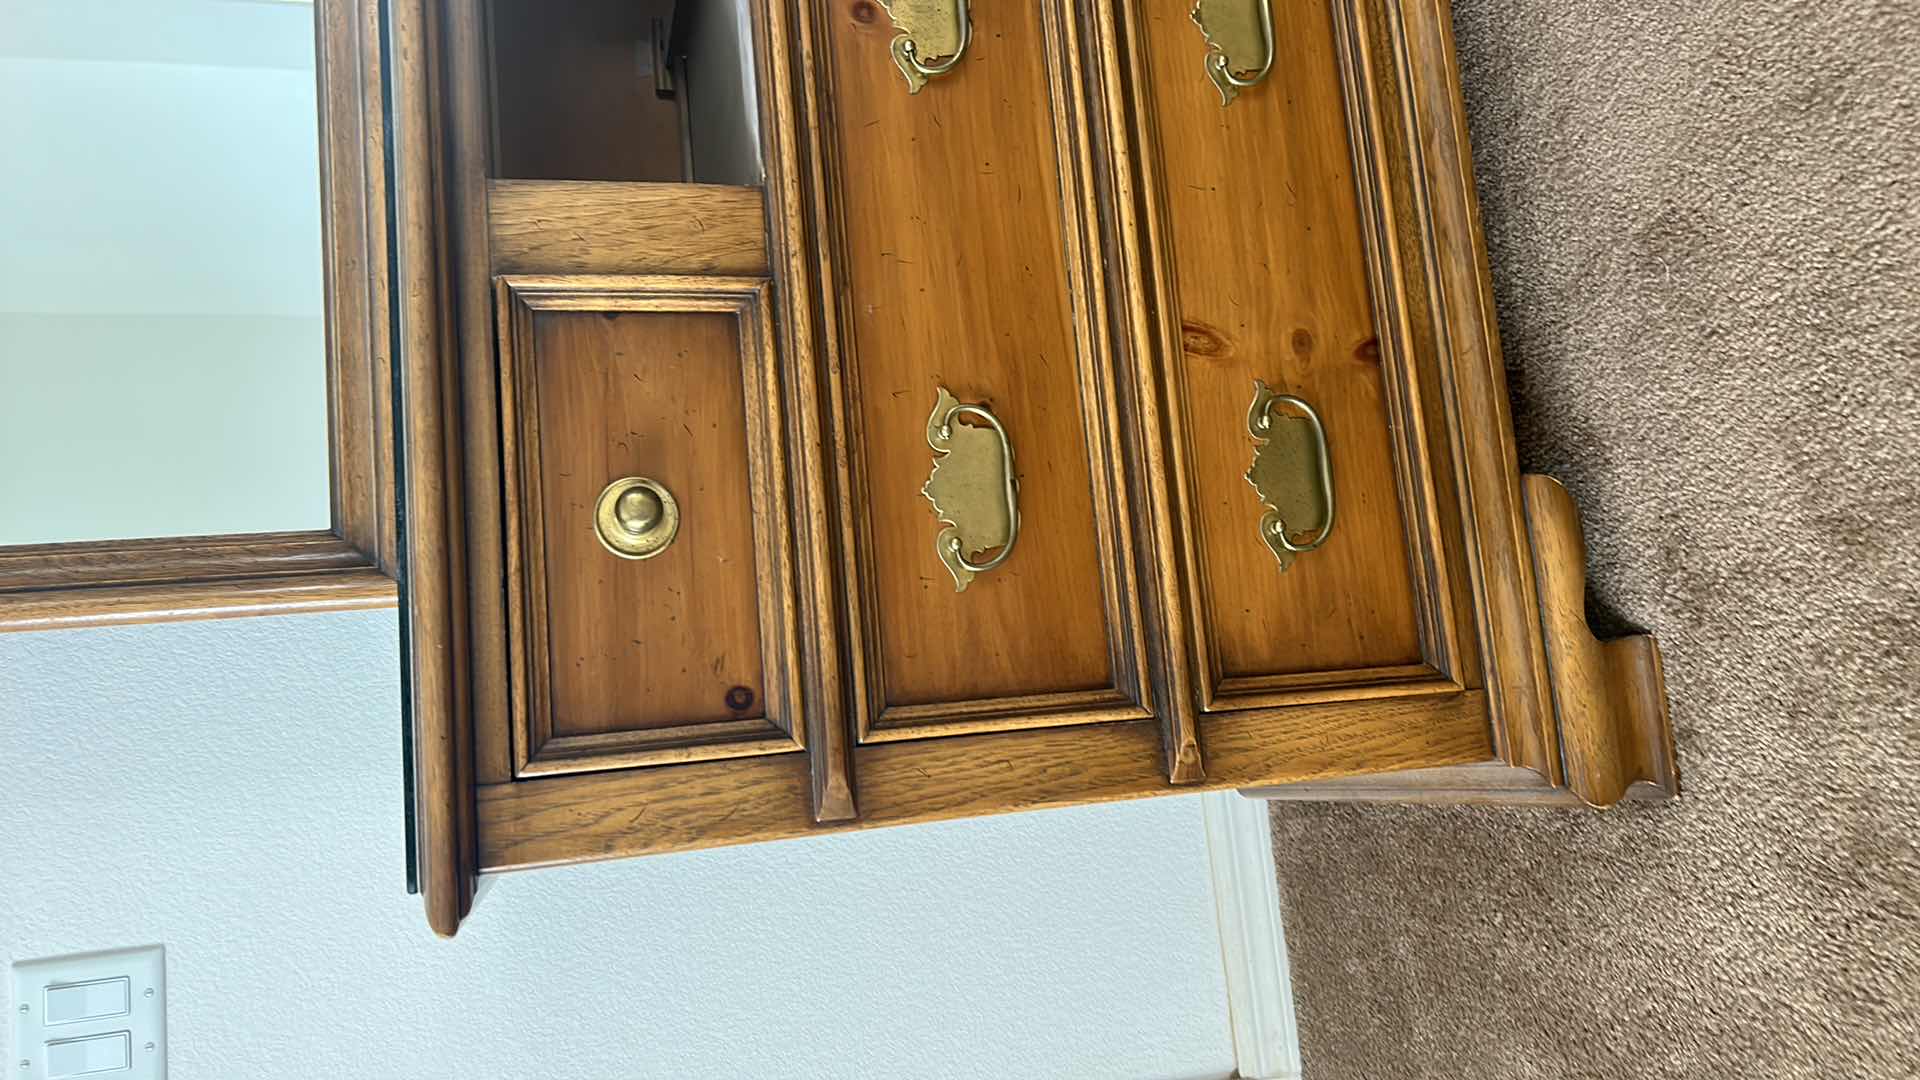 Photo 3 of DRESSER WITH MISSING DRAWER (COULD BE CUSTOMIZED) GLASS TOP AND ATTACHED MIRROR  62.5 x 21” x H 33”